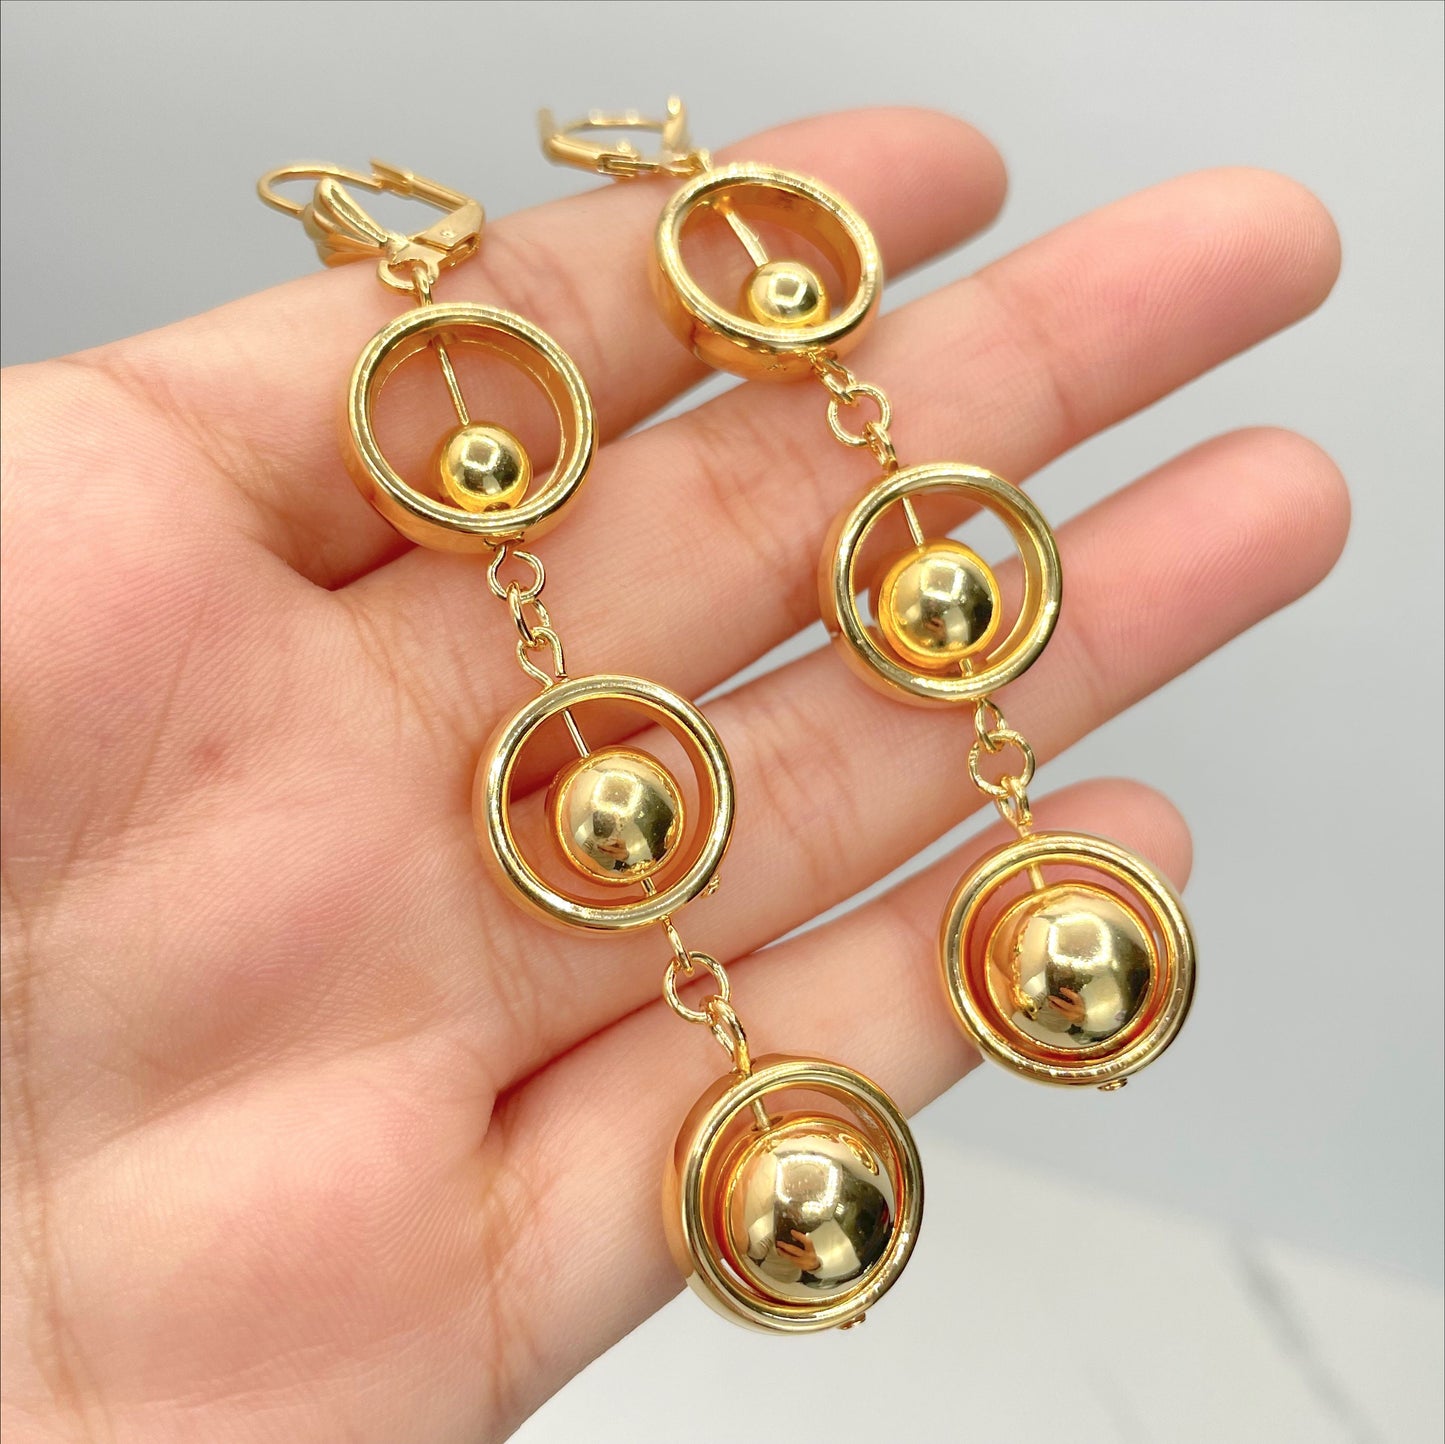 18k Gold Filled 78mm Dangle Drop Earrings with Gold Balls Wholesale Jewelry Making Supplies